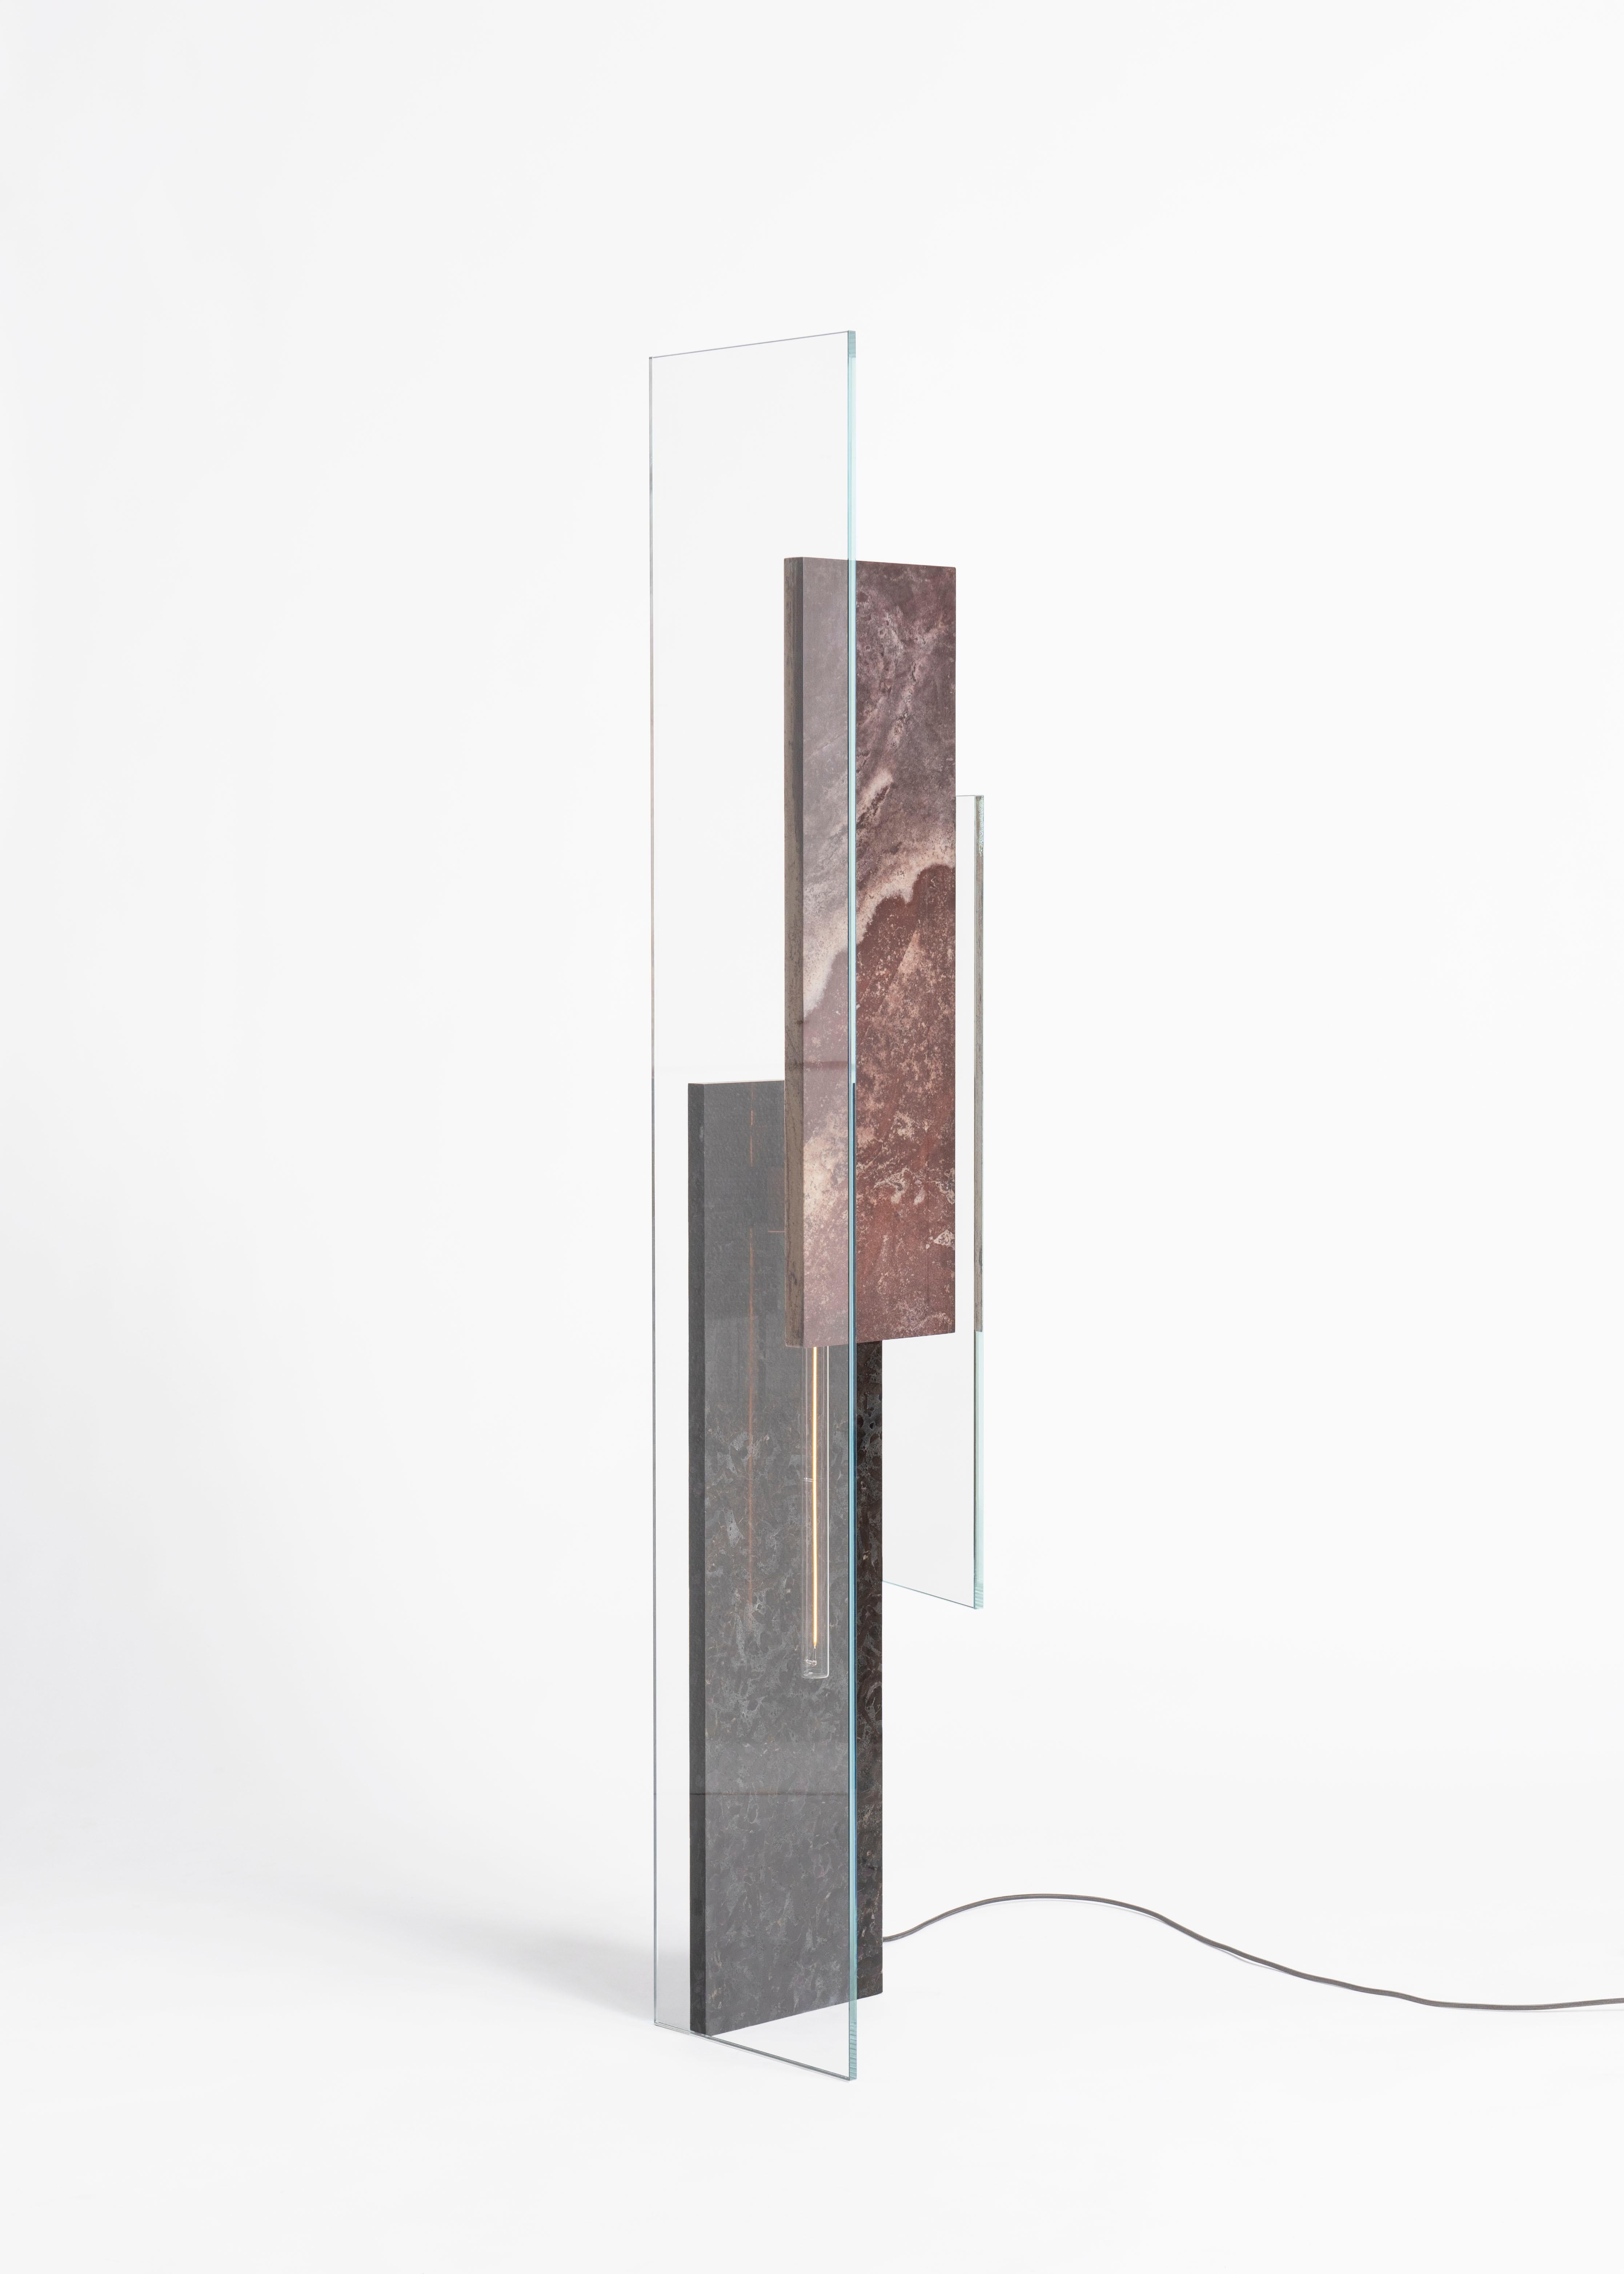 Delta L floor lamp by Frederic Saulou
Limited Edition of 5
Materials: White glass, Green pink granit from Brazil, pink marble from Portugal.
Dimensions: D 30 x W 28 x H 175 cm
Signed and numbered.

